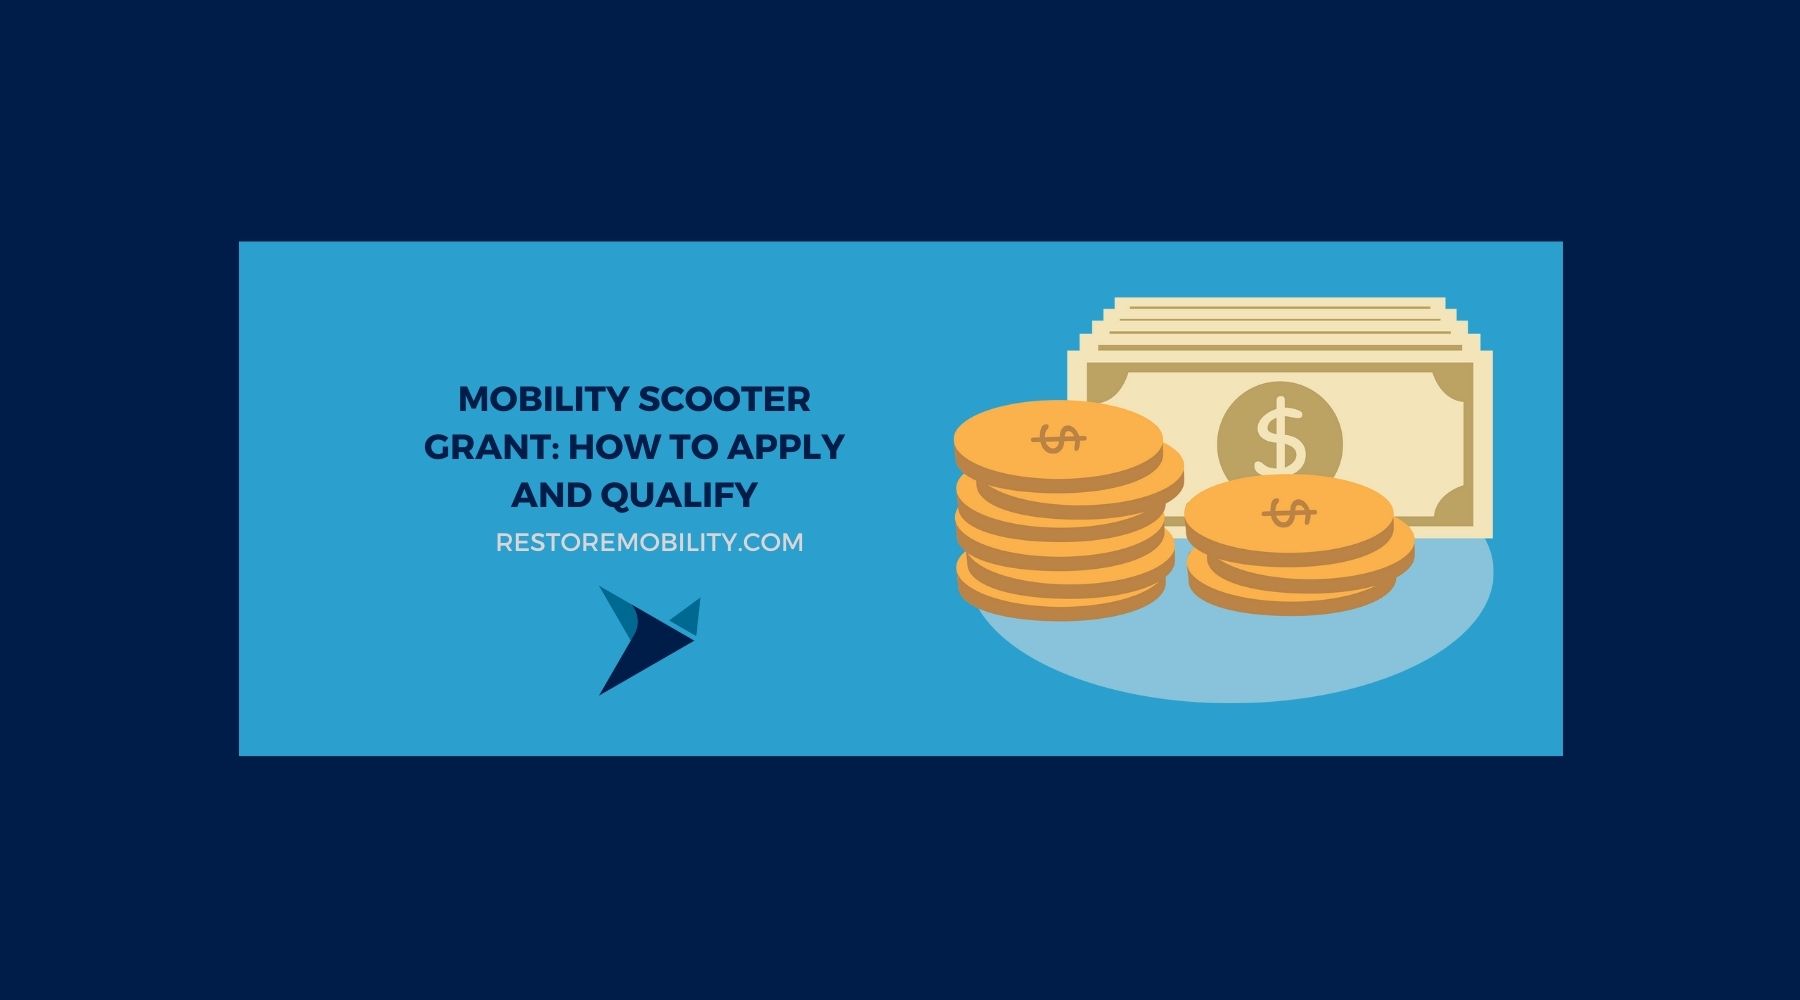 Mobility Scooter Grant: How to Apply and Qualify